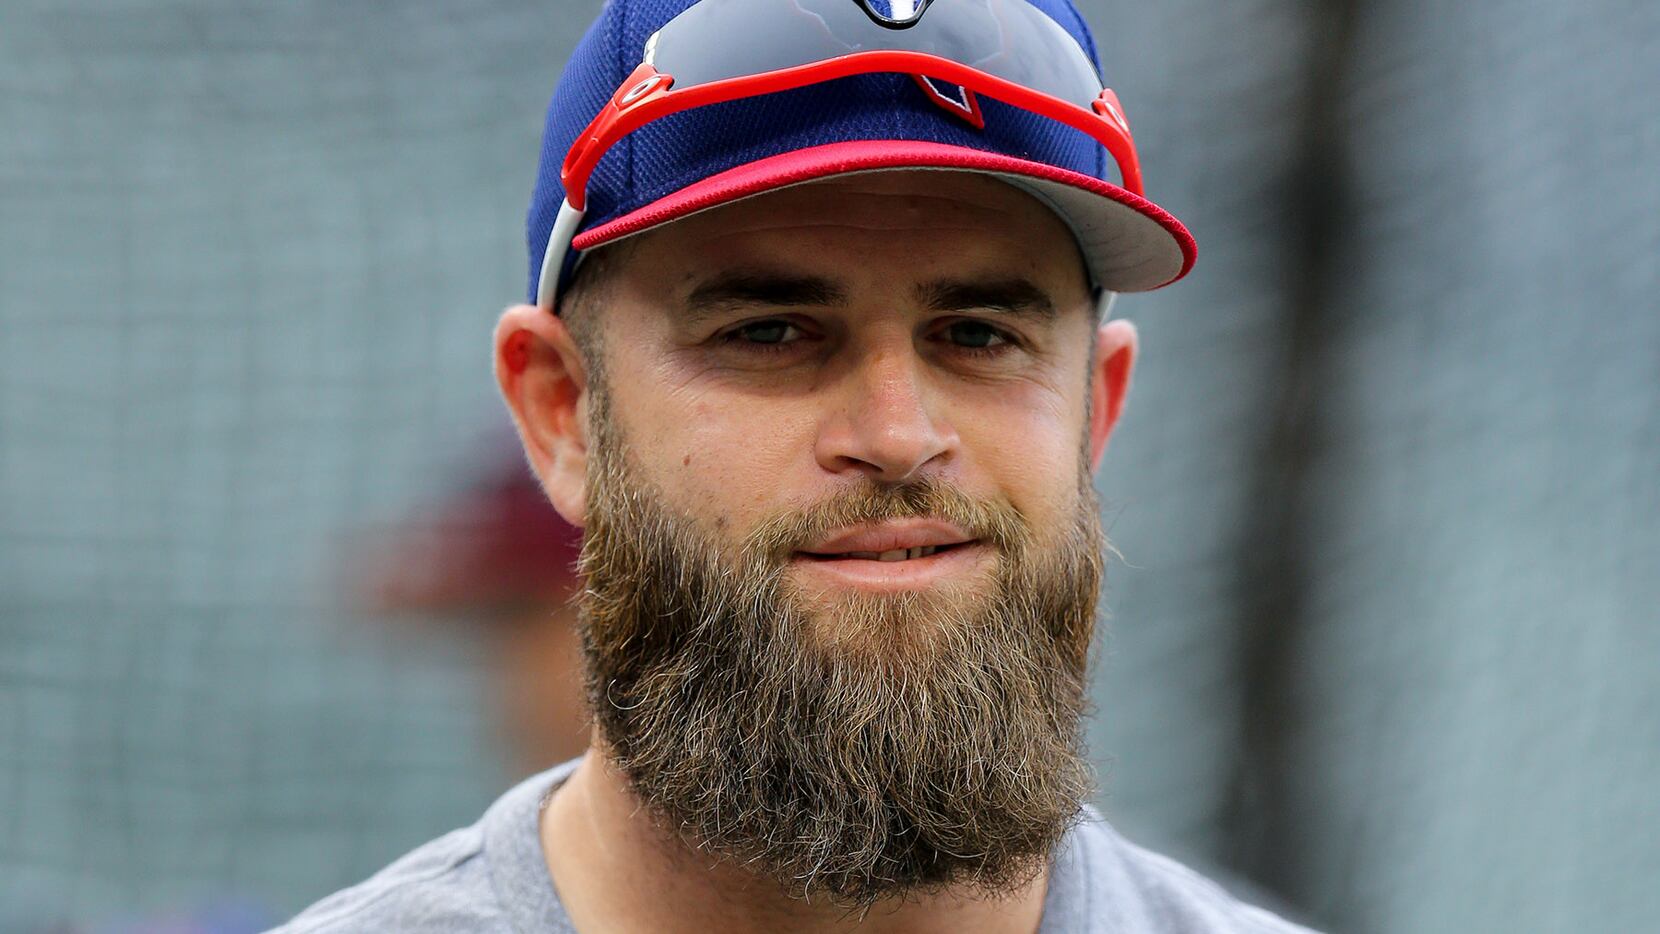 Mike Napoli sports the new 'Party at Napoli's' shirt